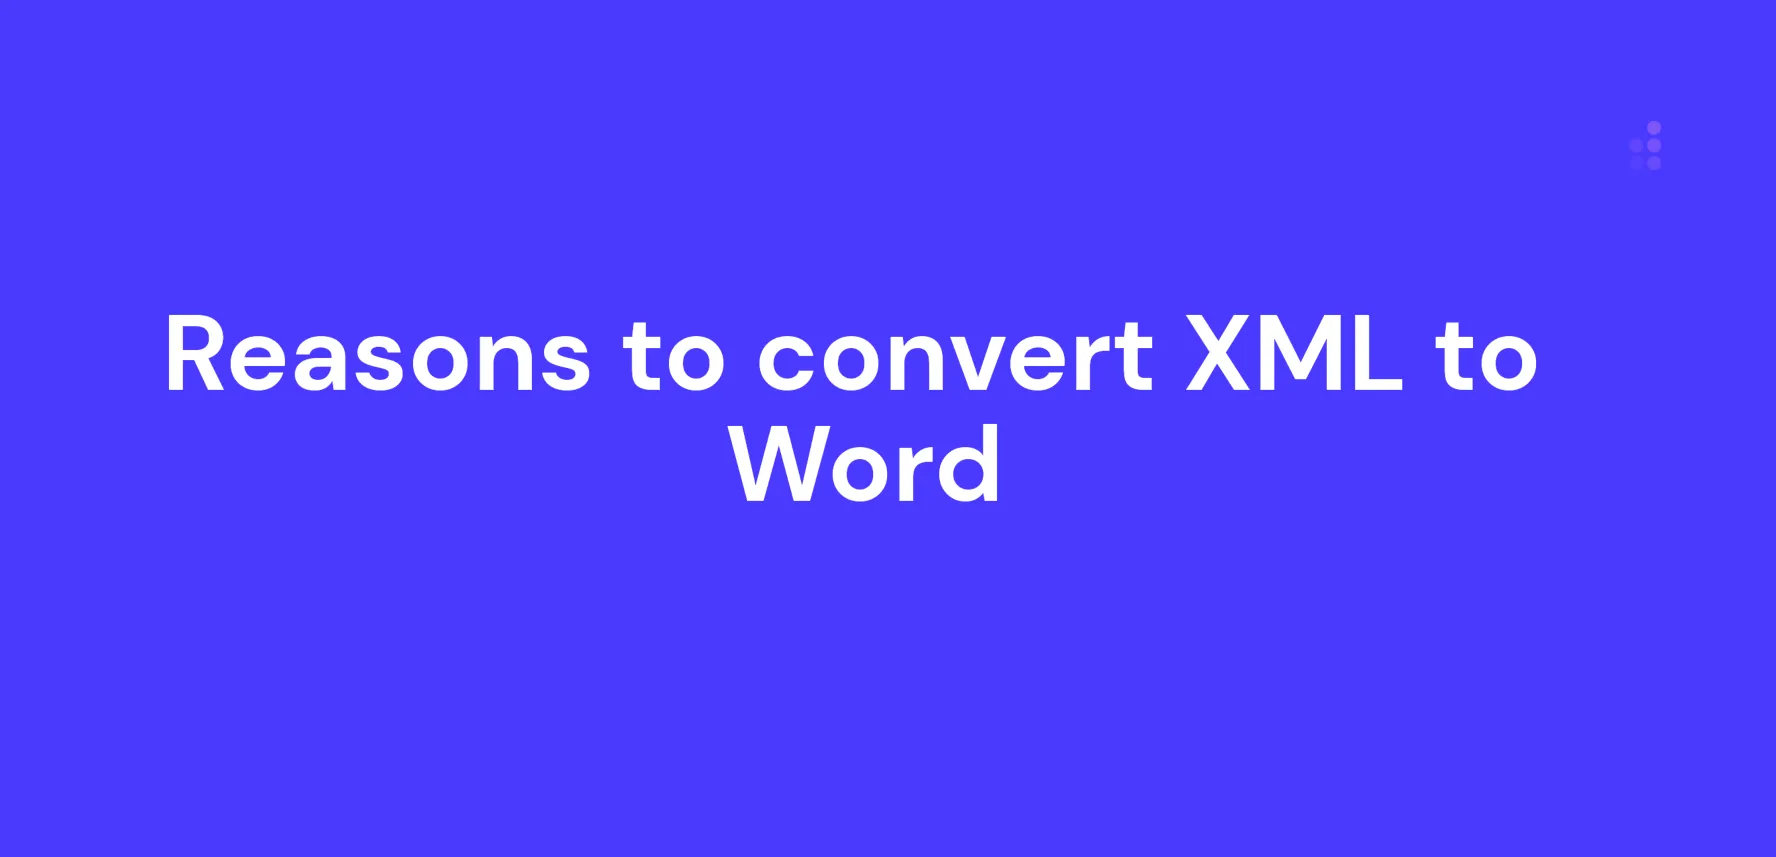 the reasons to convert xml to word